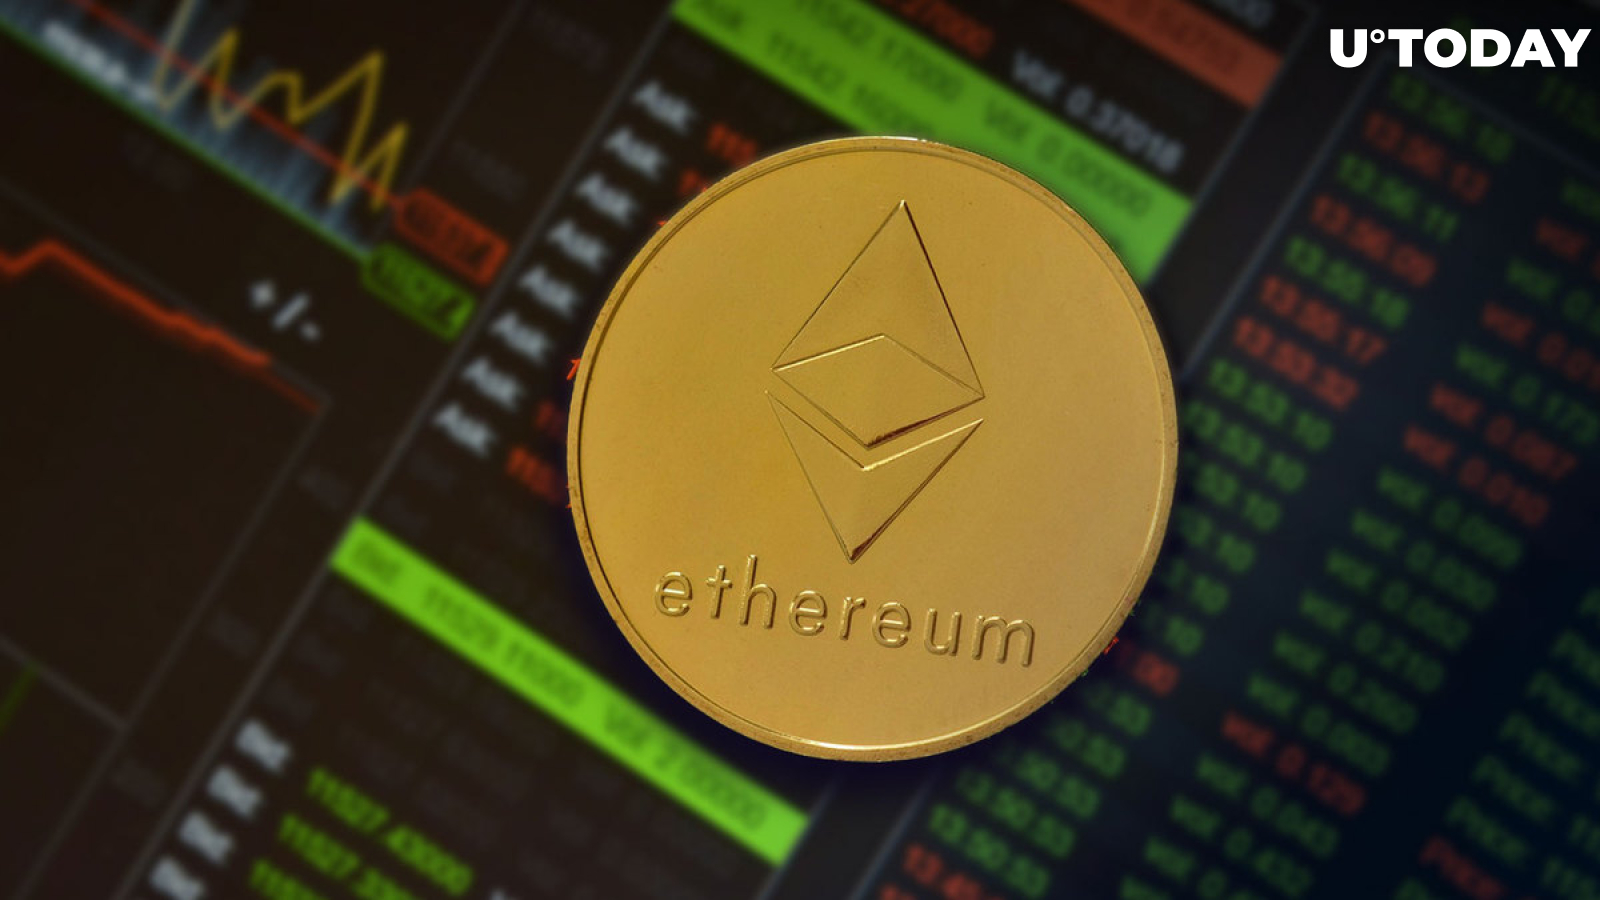 Ethereum (ETH) Price Slips, Analyst Gives Possible Reasons Why